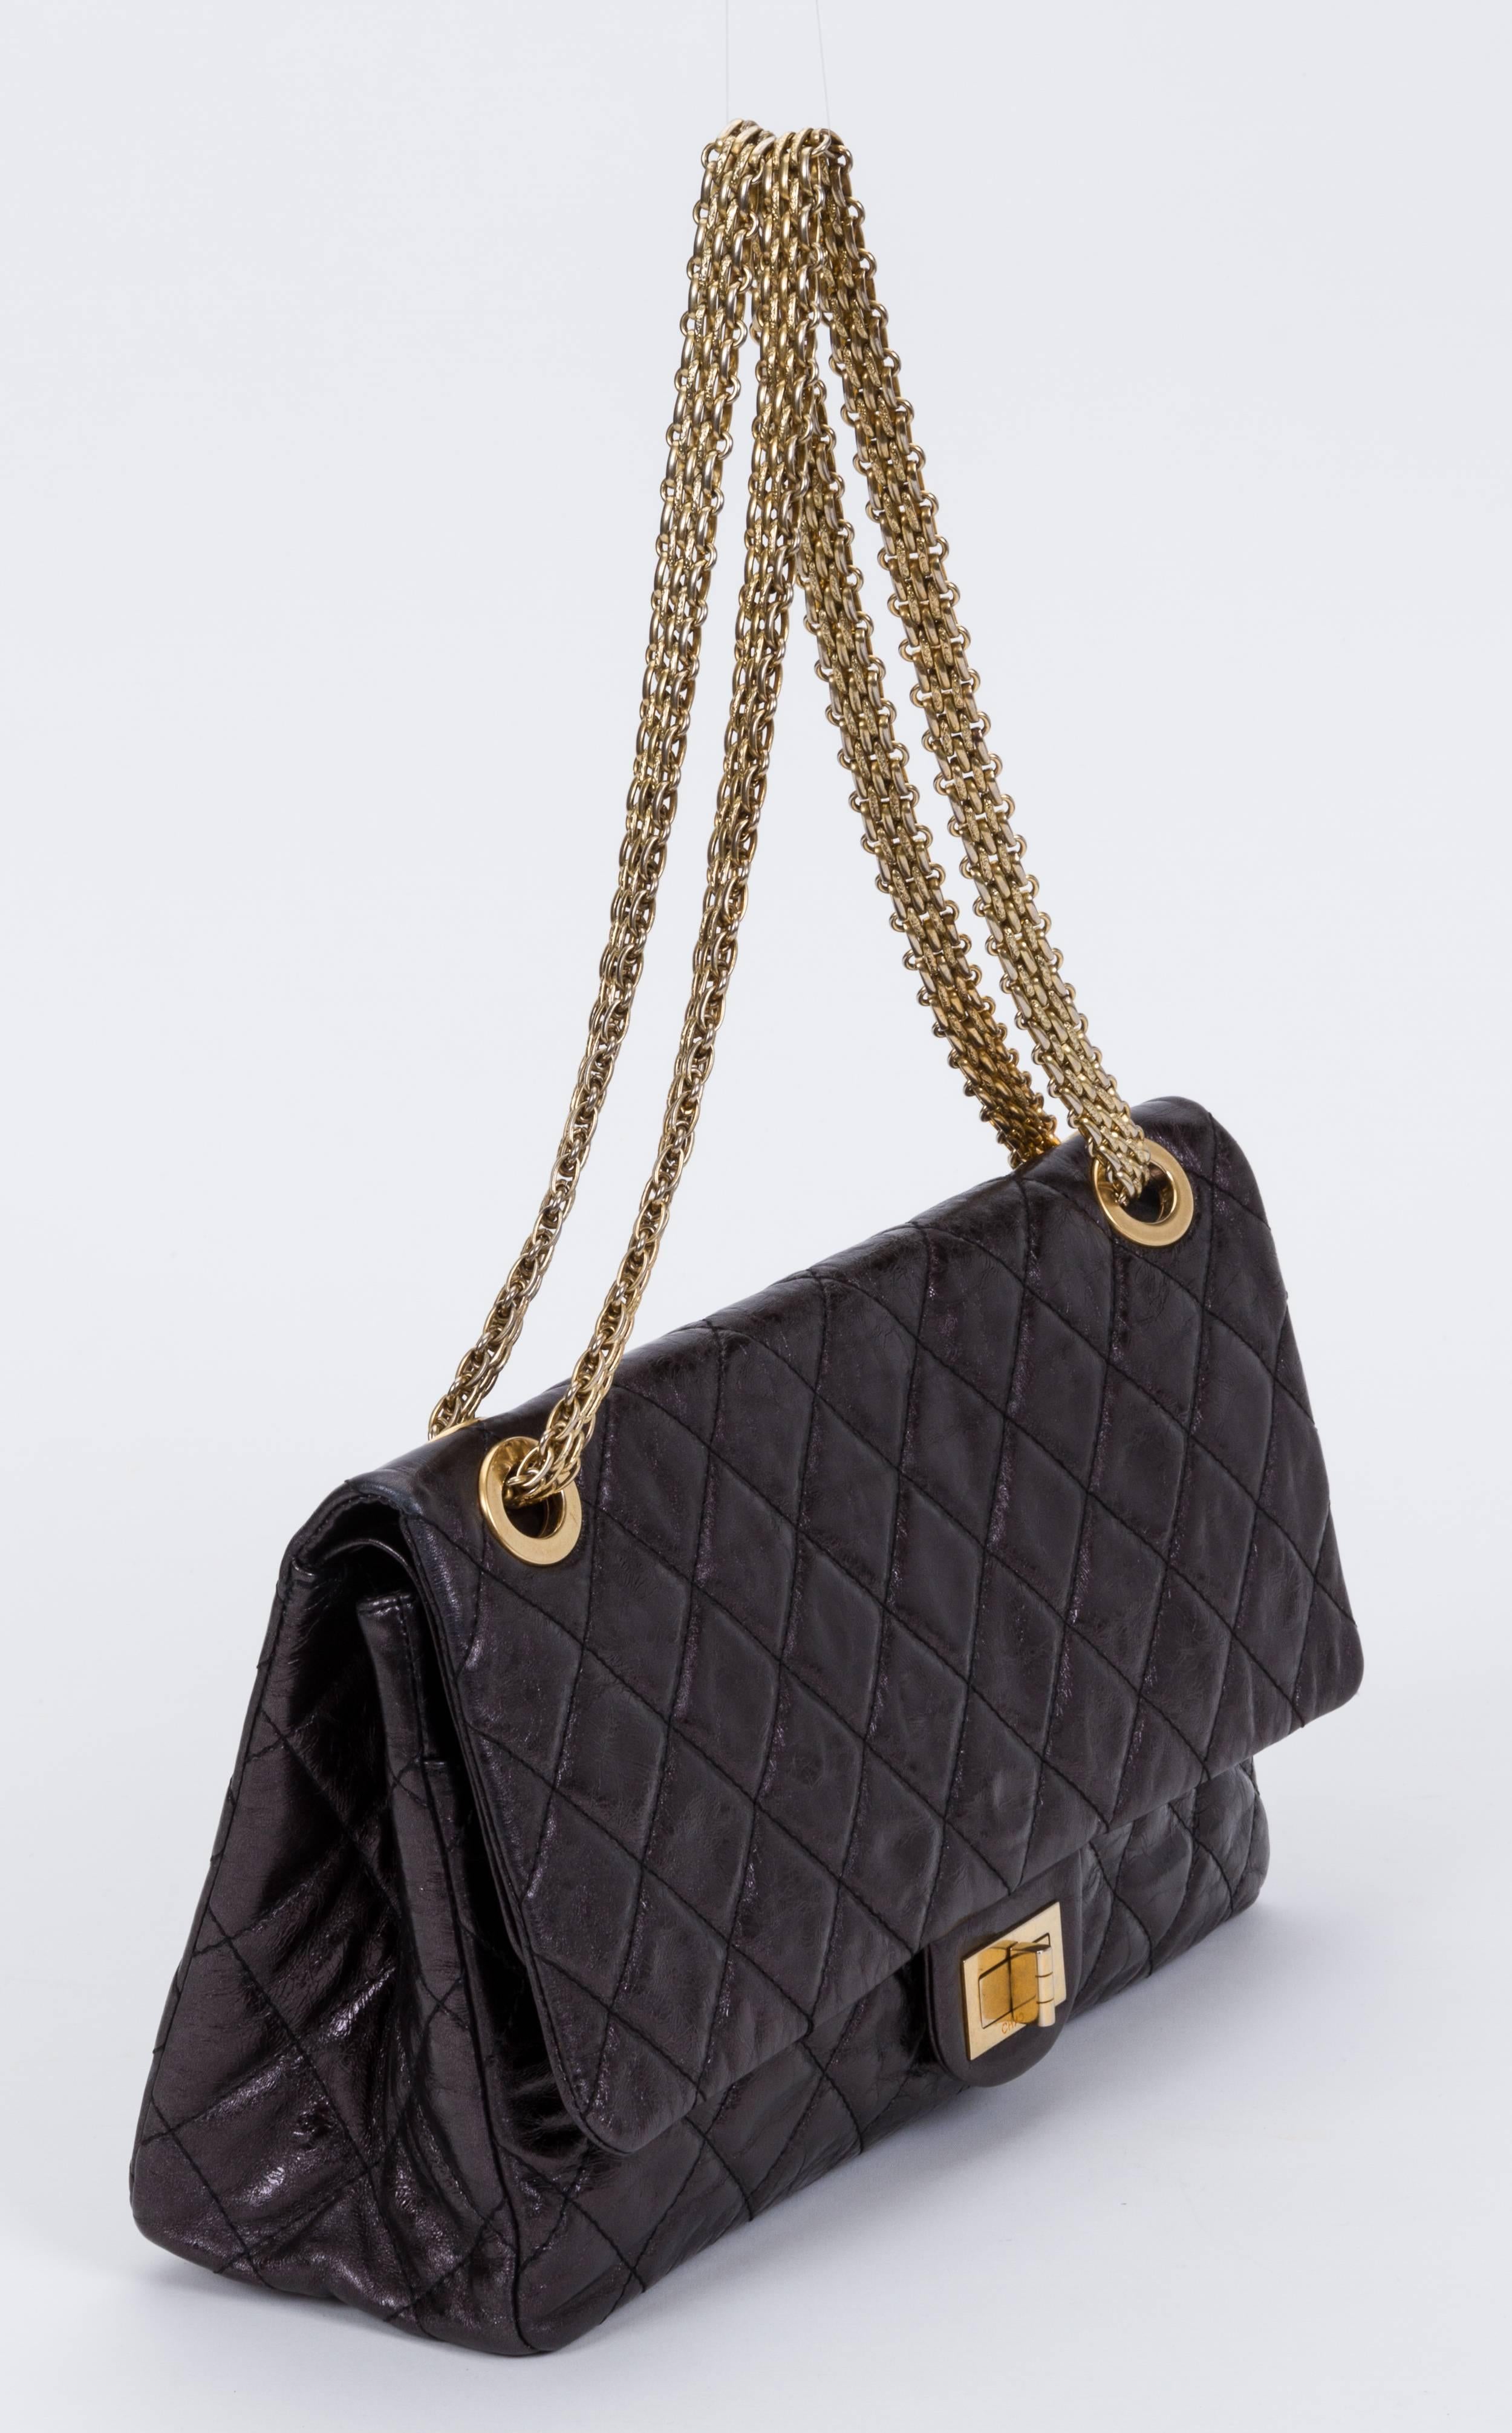 Chanel maxi double flap bag, reissue collection. Black metallic distressed leather and thick gold mademoiselle chain. Collection 2008/2009. Shoulder drop, 11